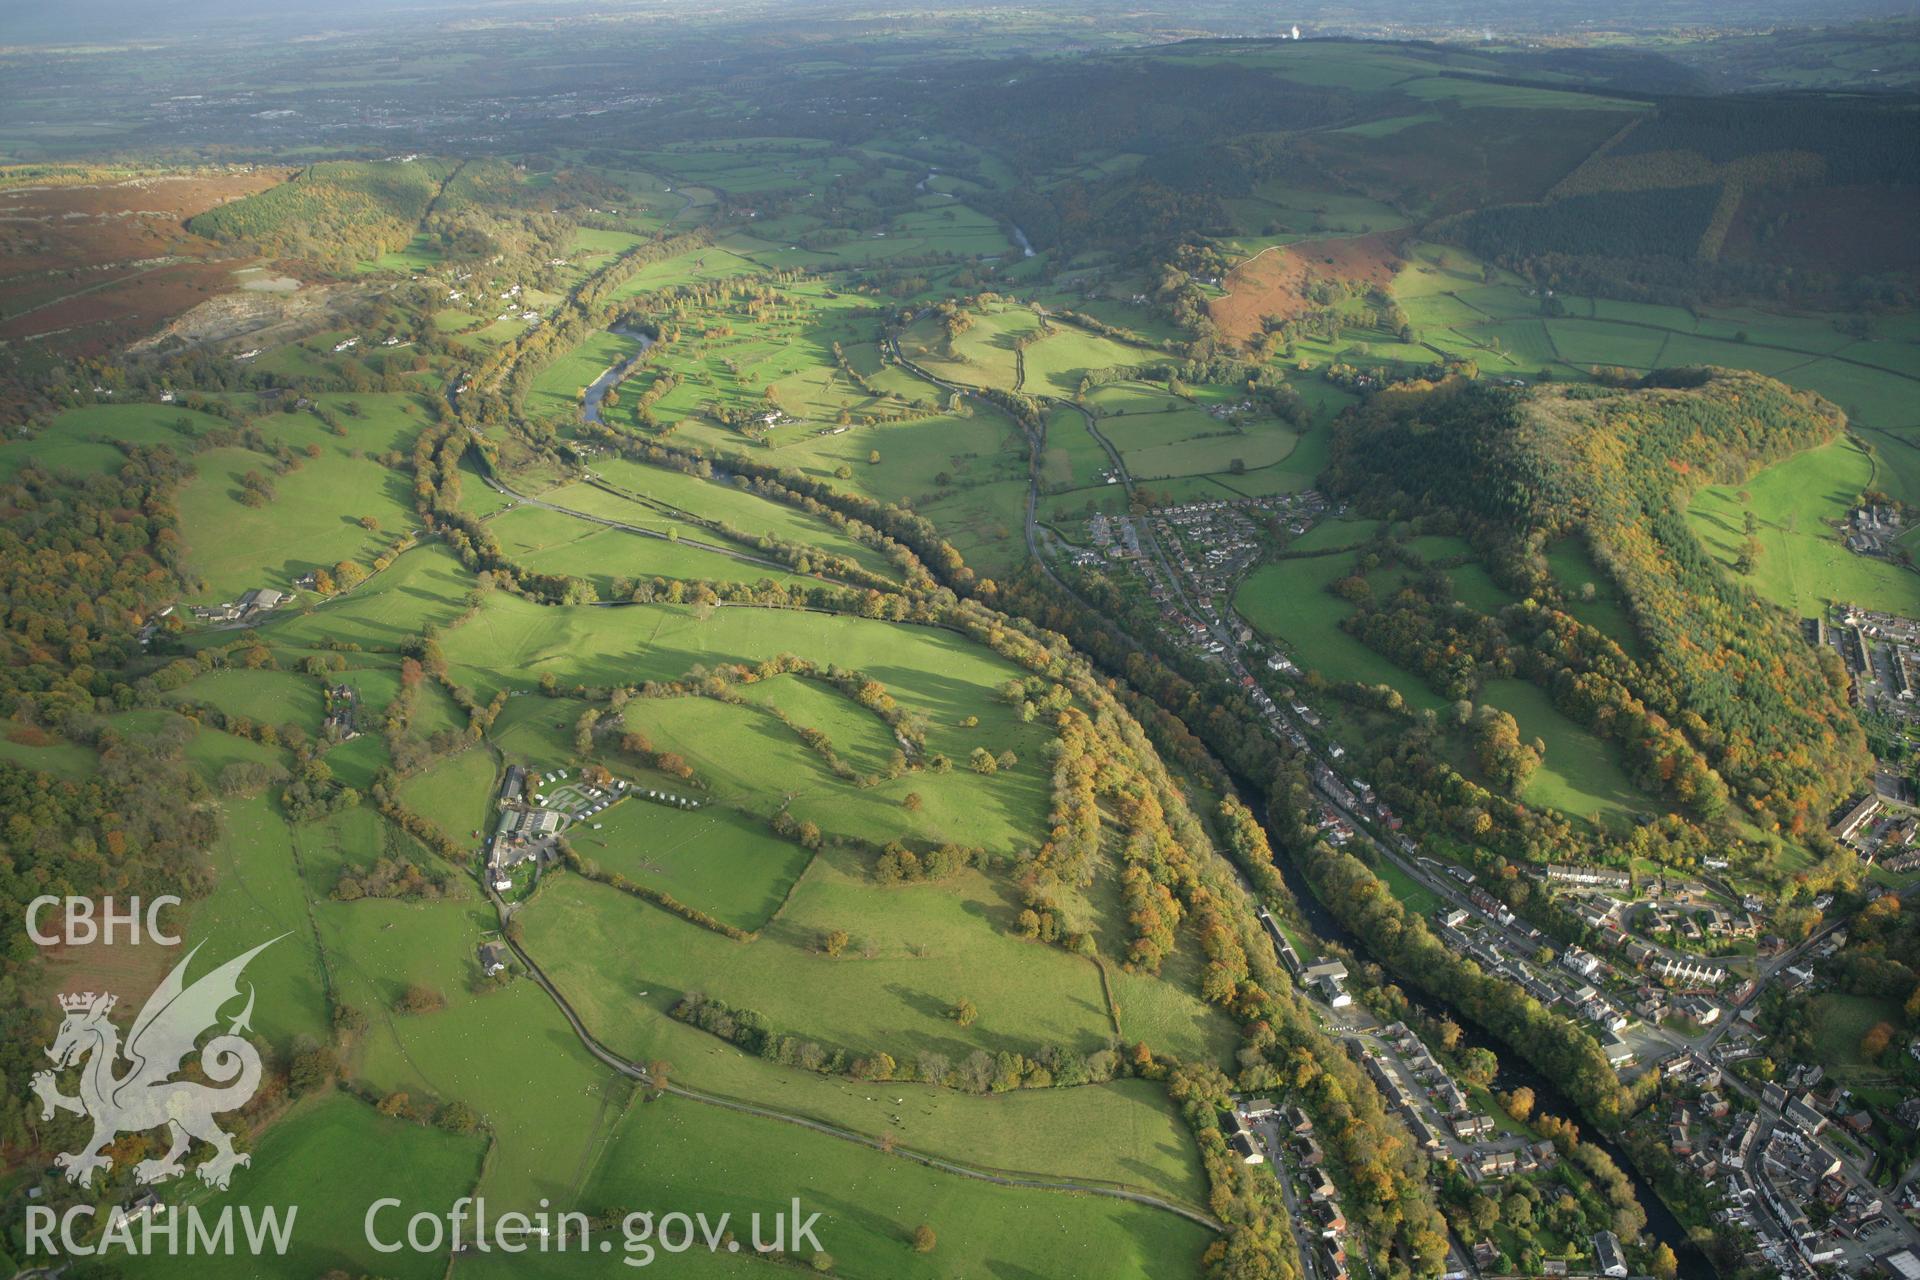 RCAHMW colour oblique photograph of Dee Valley east of Llangollen. Taken by Toby Driver on 30/10/2007.